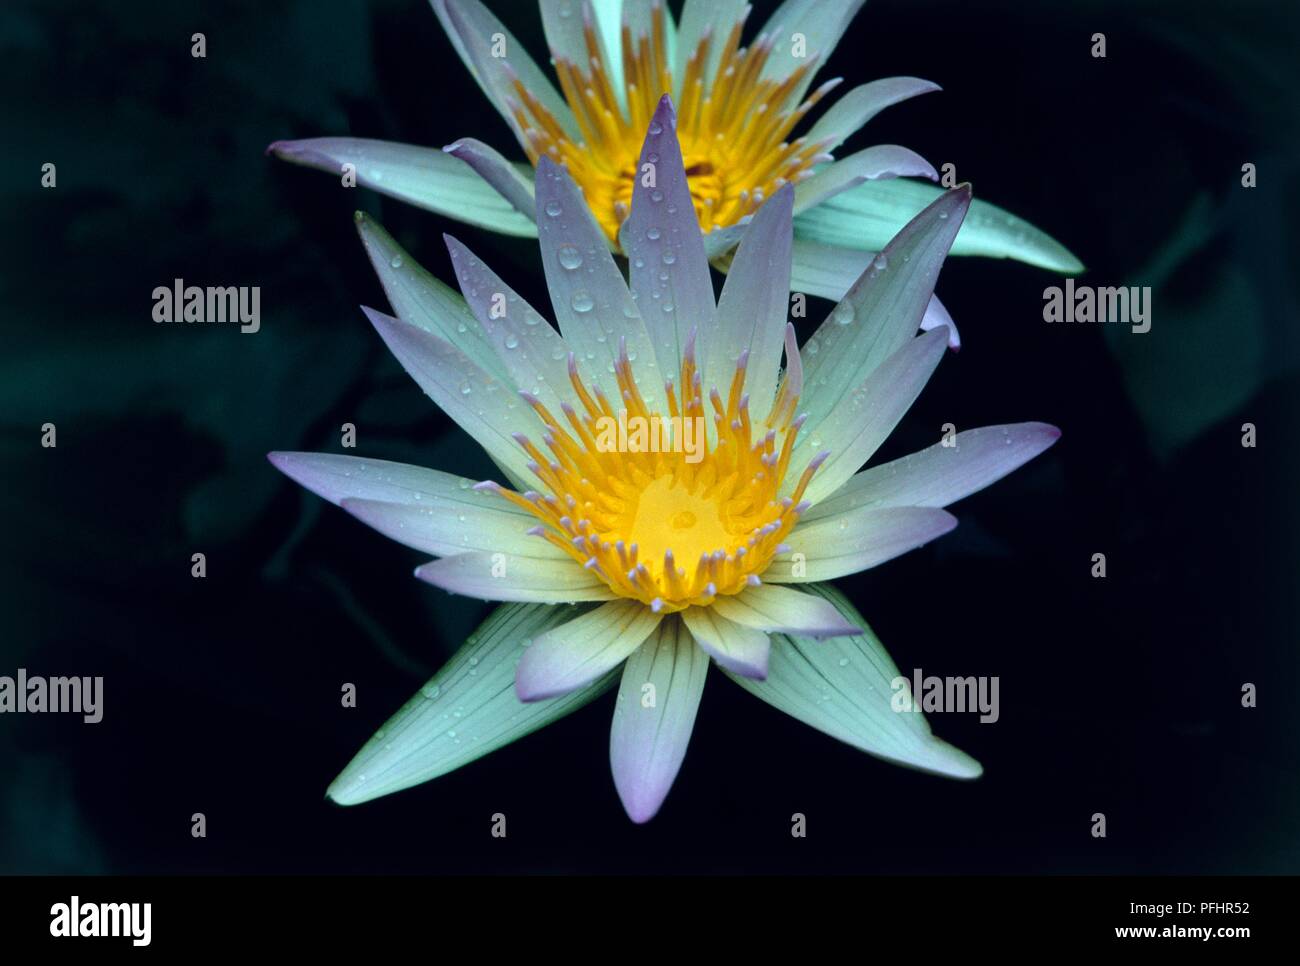 Nymphaea x daubenyana (Water lily), yellow and white flower heads with drops of water on the petals Stock Photo